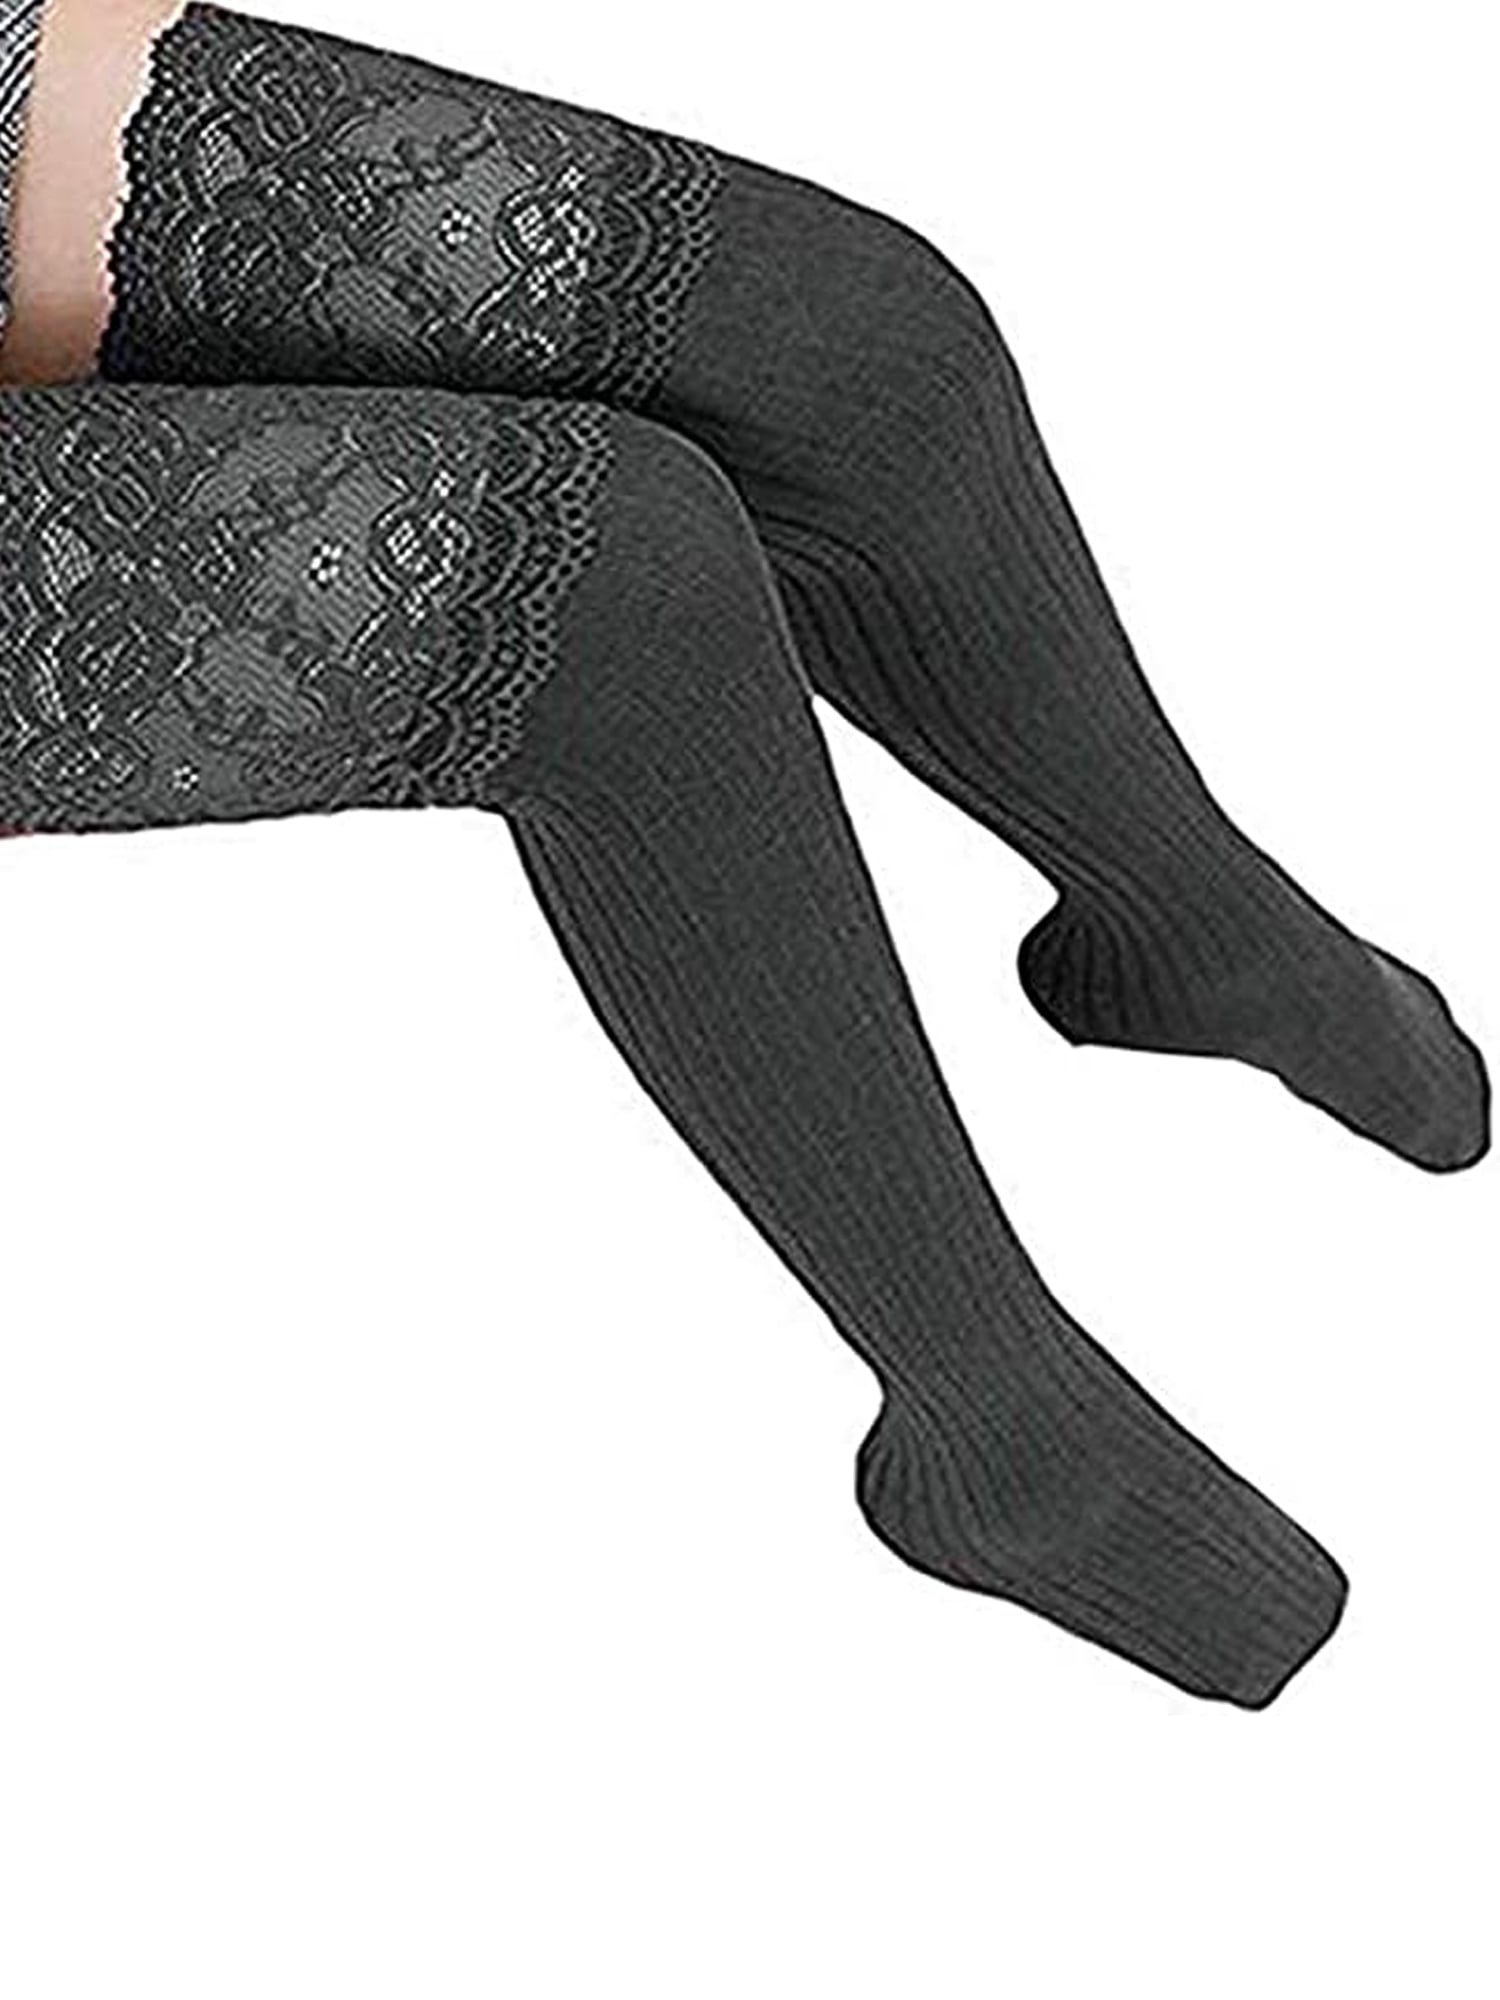 Black, One Size UK 4-6½ New Ladies Womens Over Knee Long Casual Ladies Thigh High Plain Stretch Fit Cotton Overknee Socks